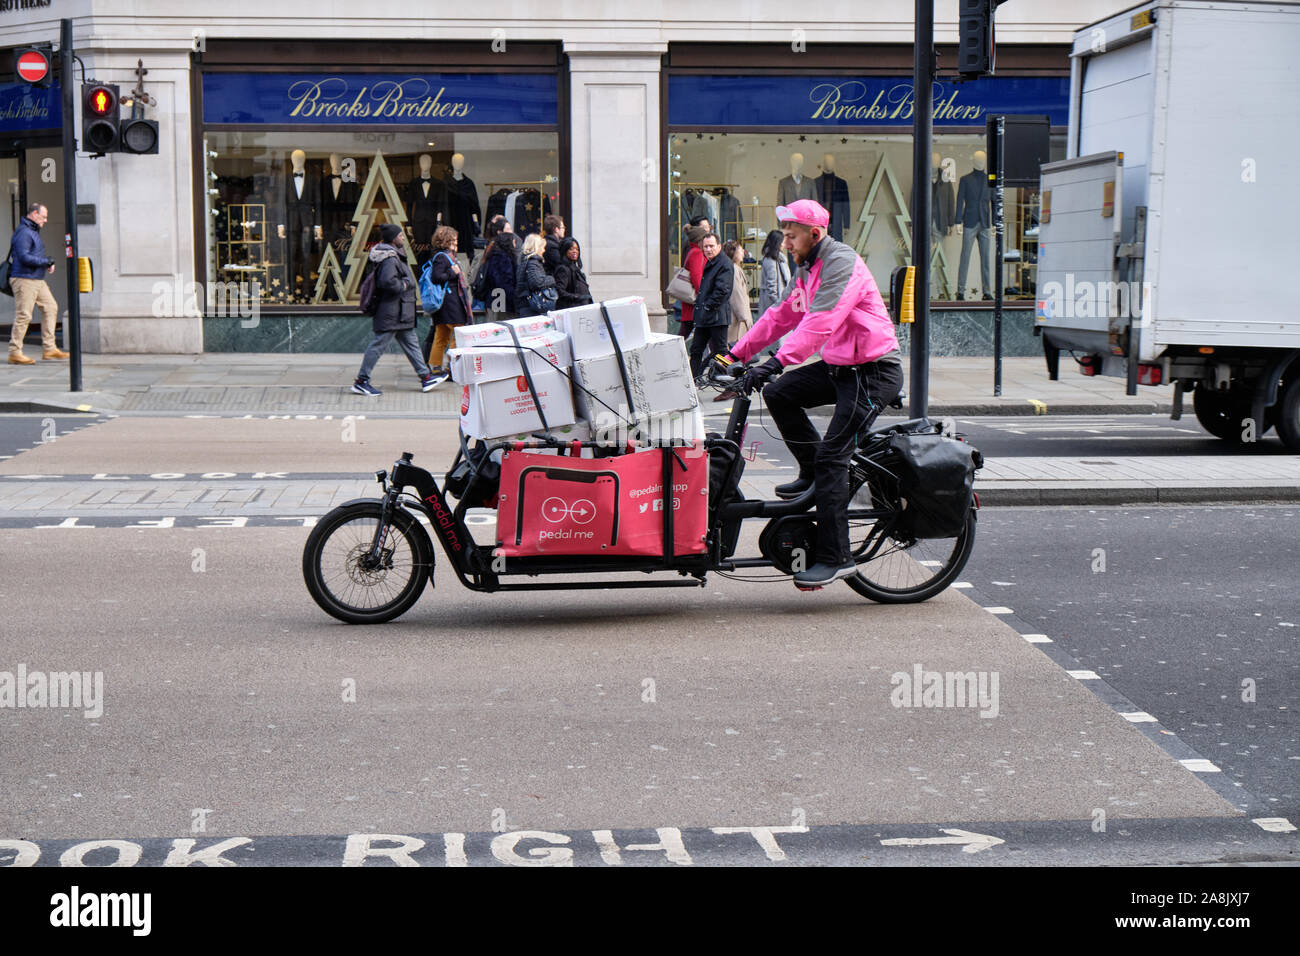 Pedal Me cargo bike delivery service, loaded with multiple boxes riding on Regent Street, London, UK. Stock Photo